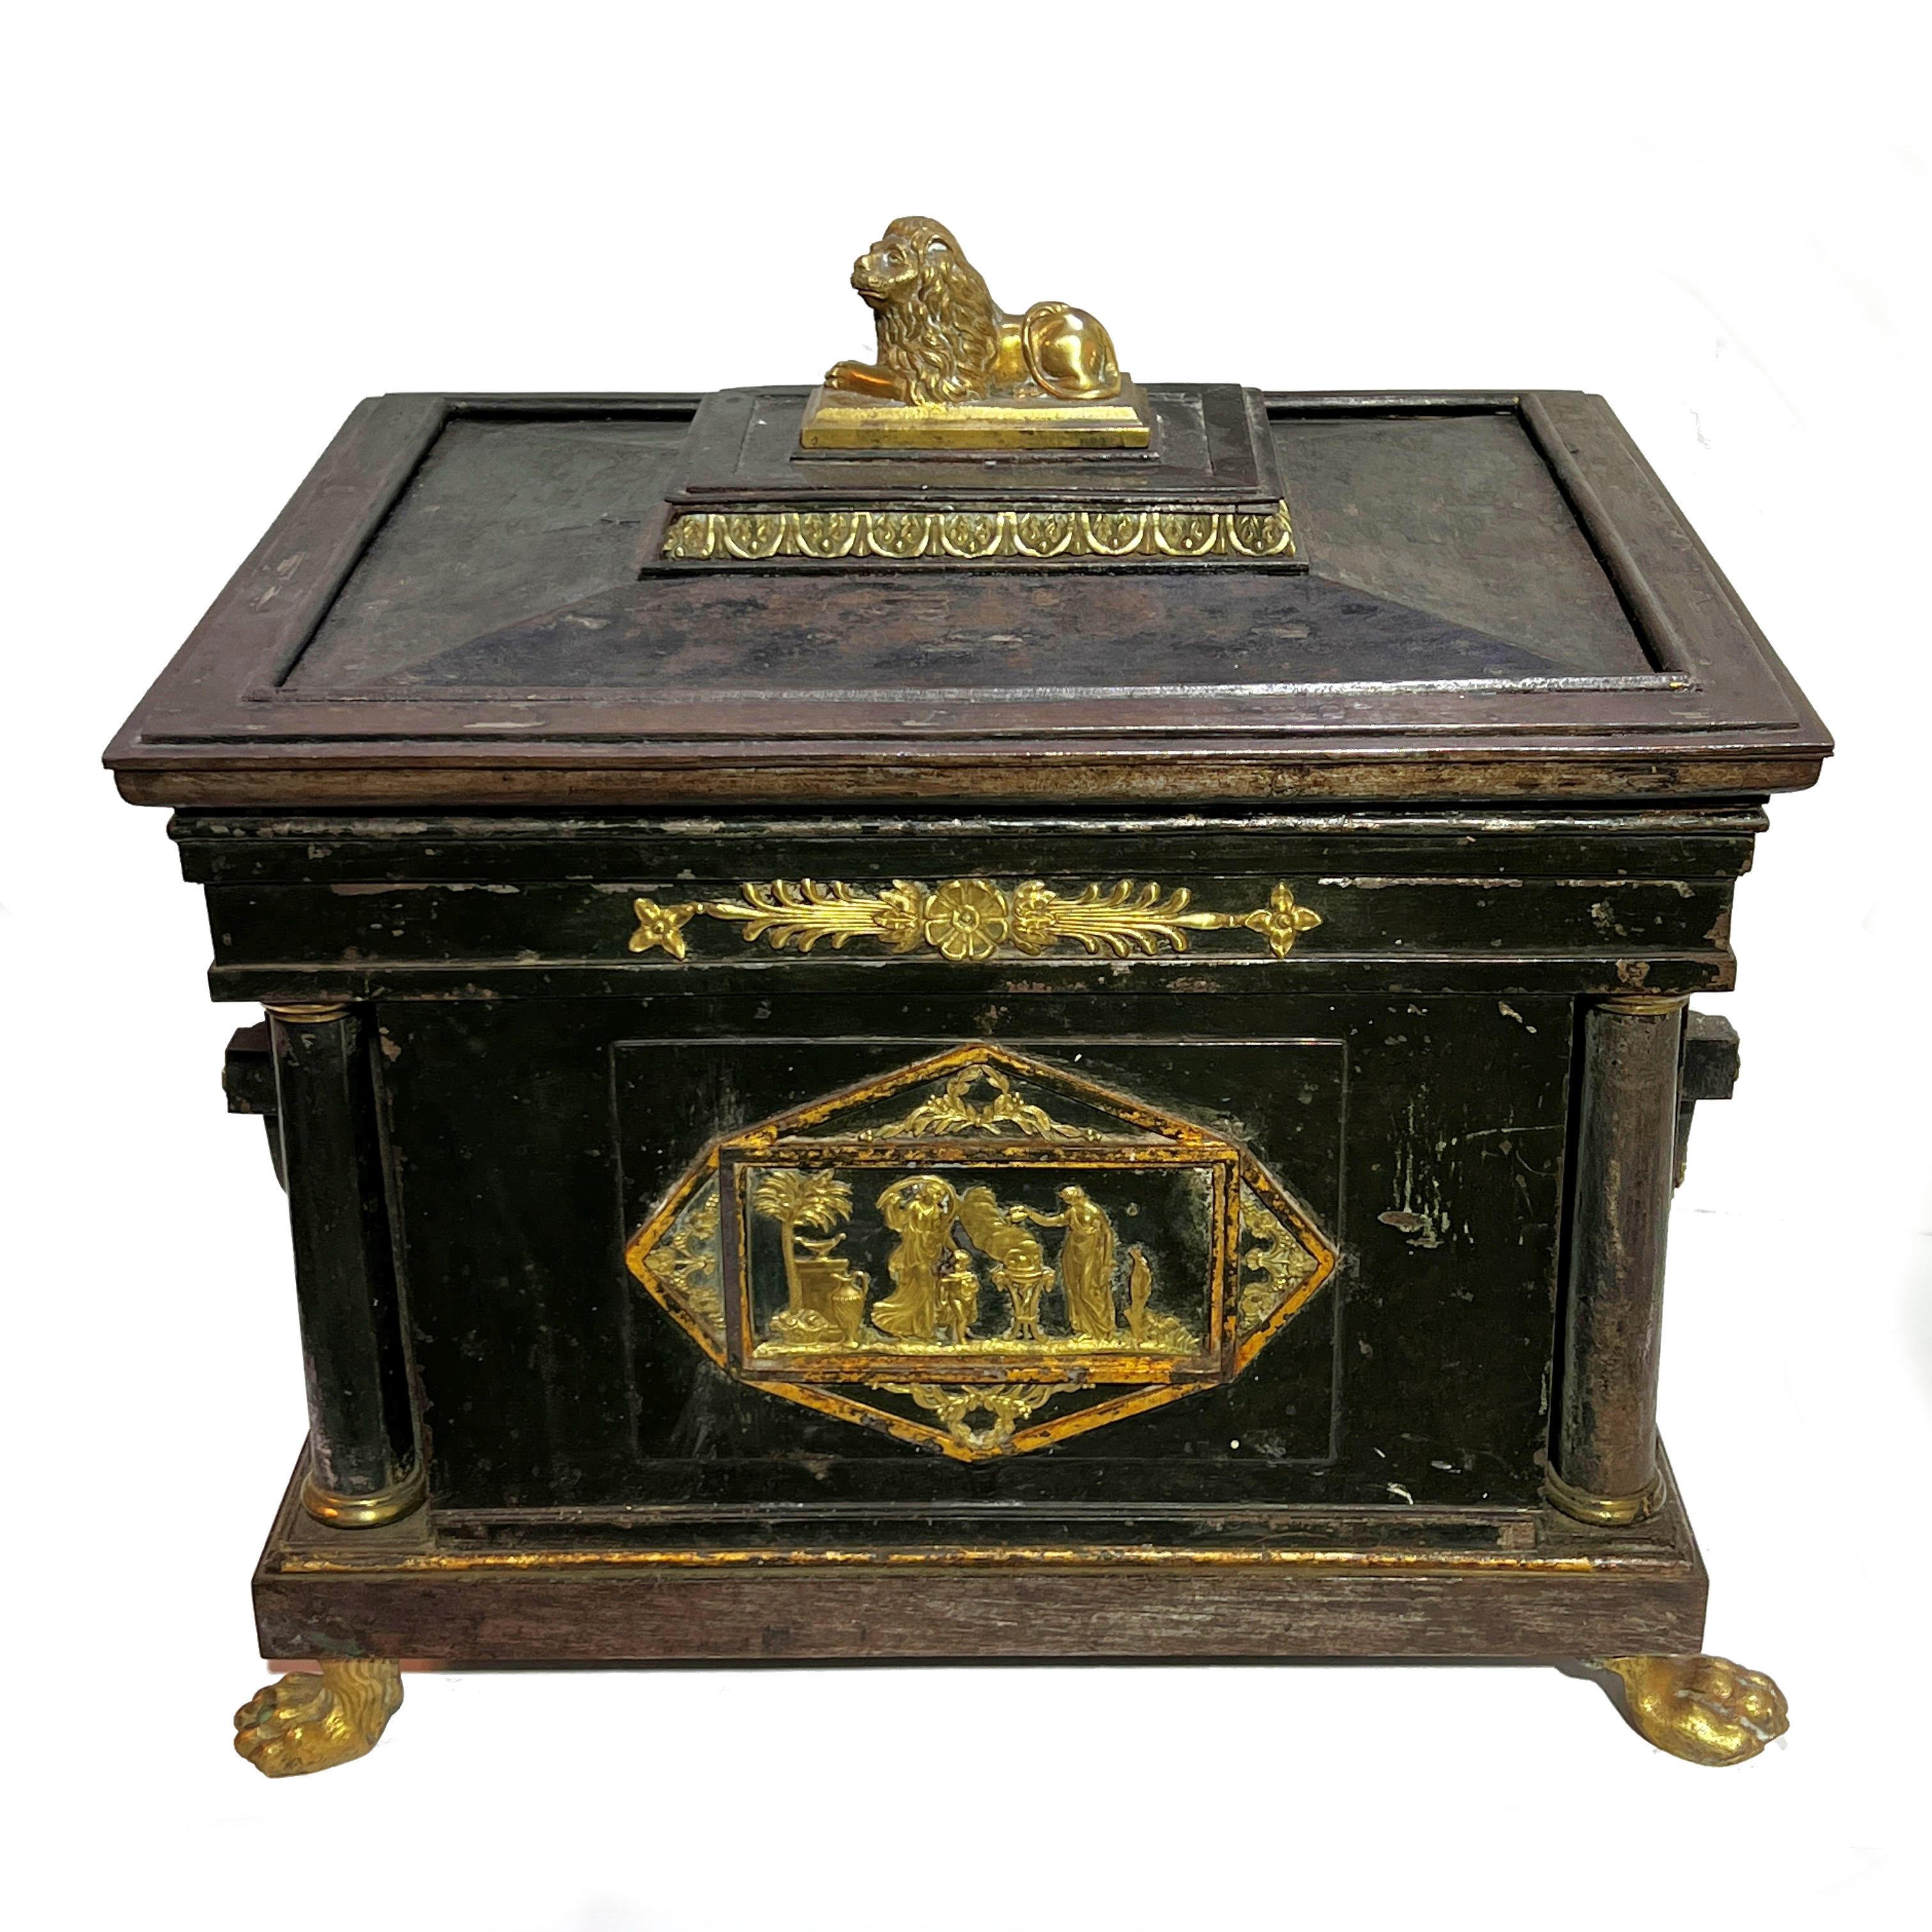 Our late Regency period strongbox features gilt neoclassical mounts including lion masks and rosettes at the sides, Roman Tuscan style columns at the front corners, figurative panel on front depicting Roman goddesses stoking a torchere, recumbent